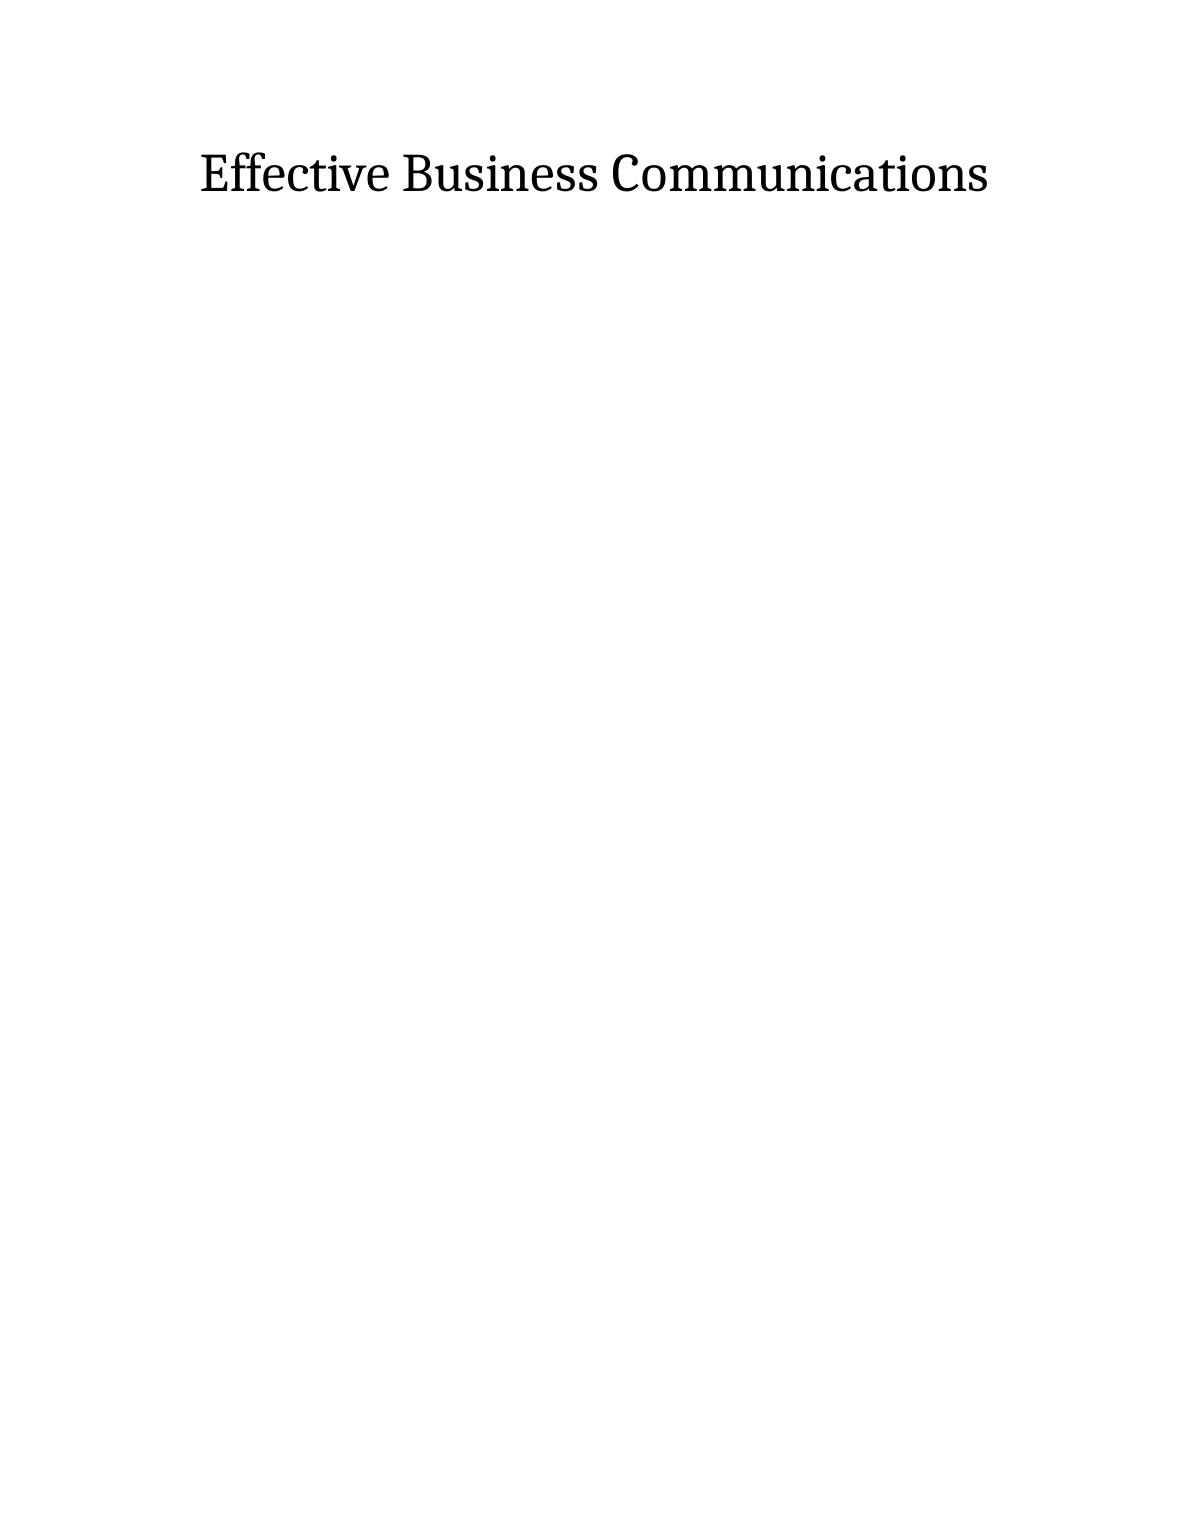 Effective Business Communications Assignment_1